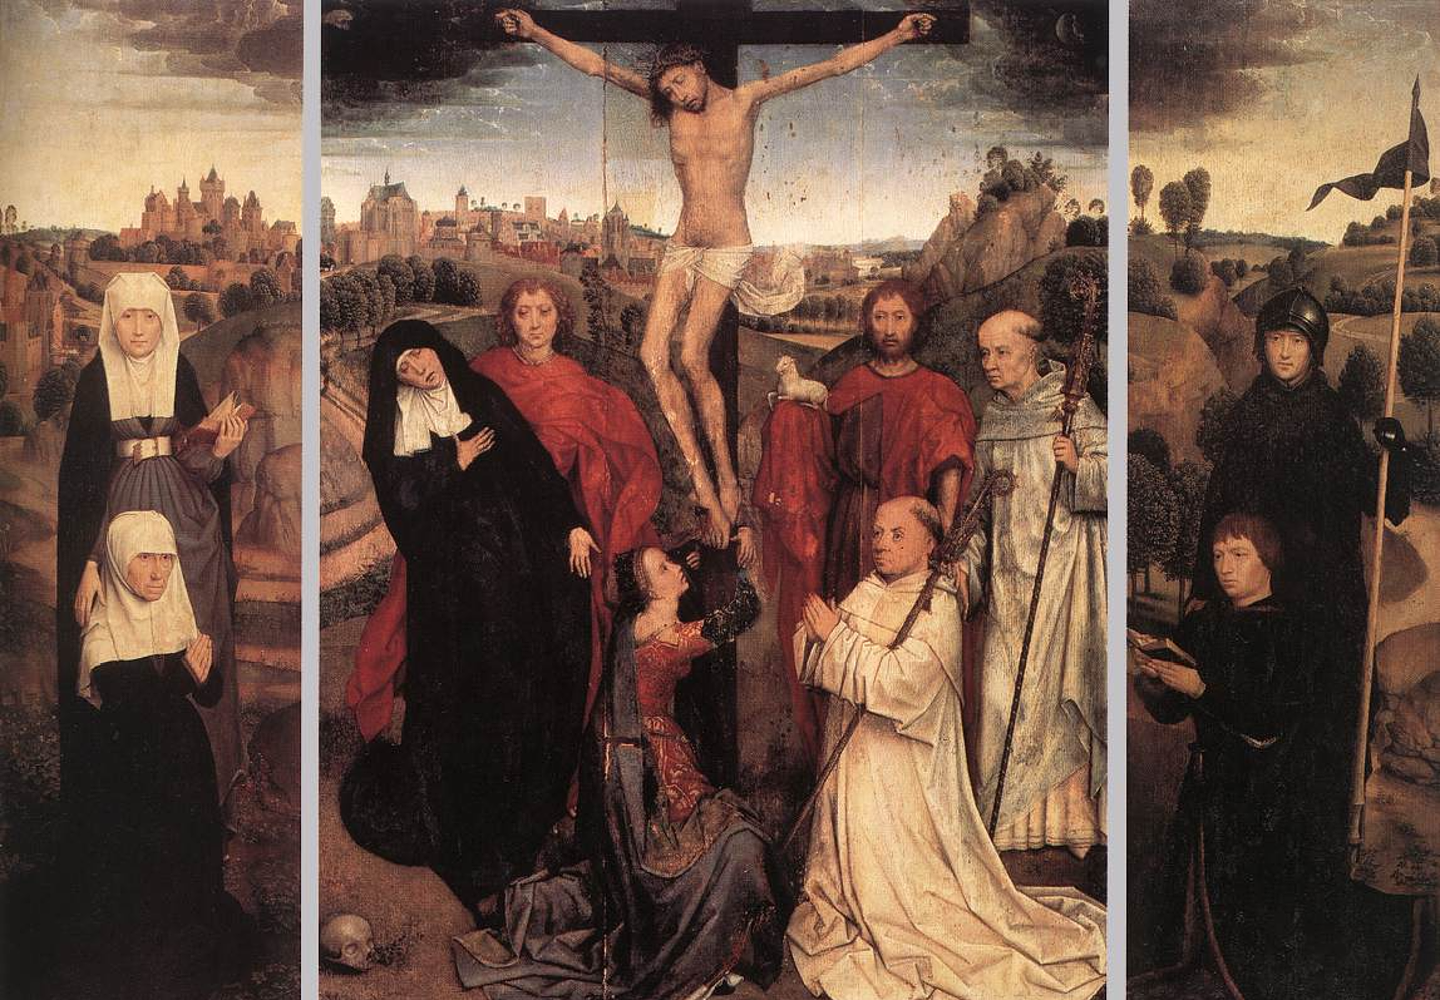 Morgan’s Memling Panels and the Crabbe Triptych: An Interactive Spotlight Tour